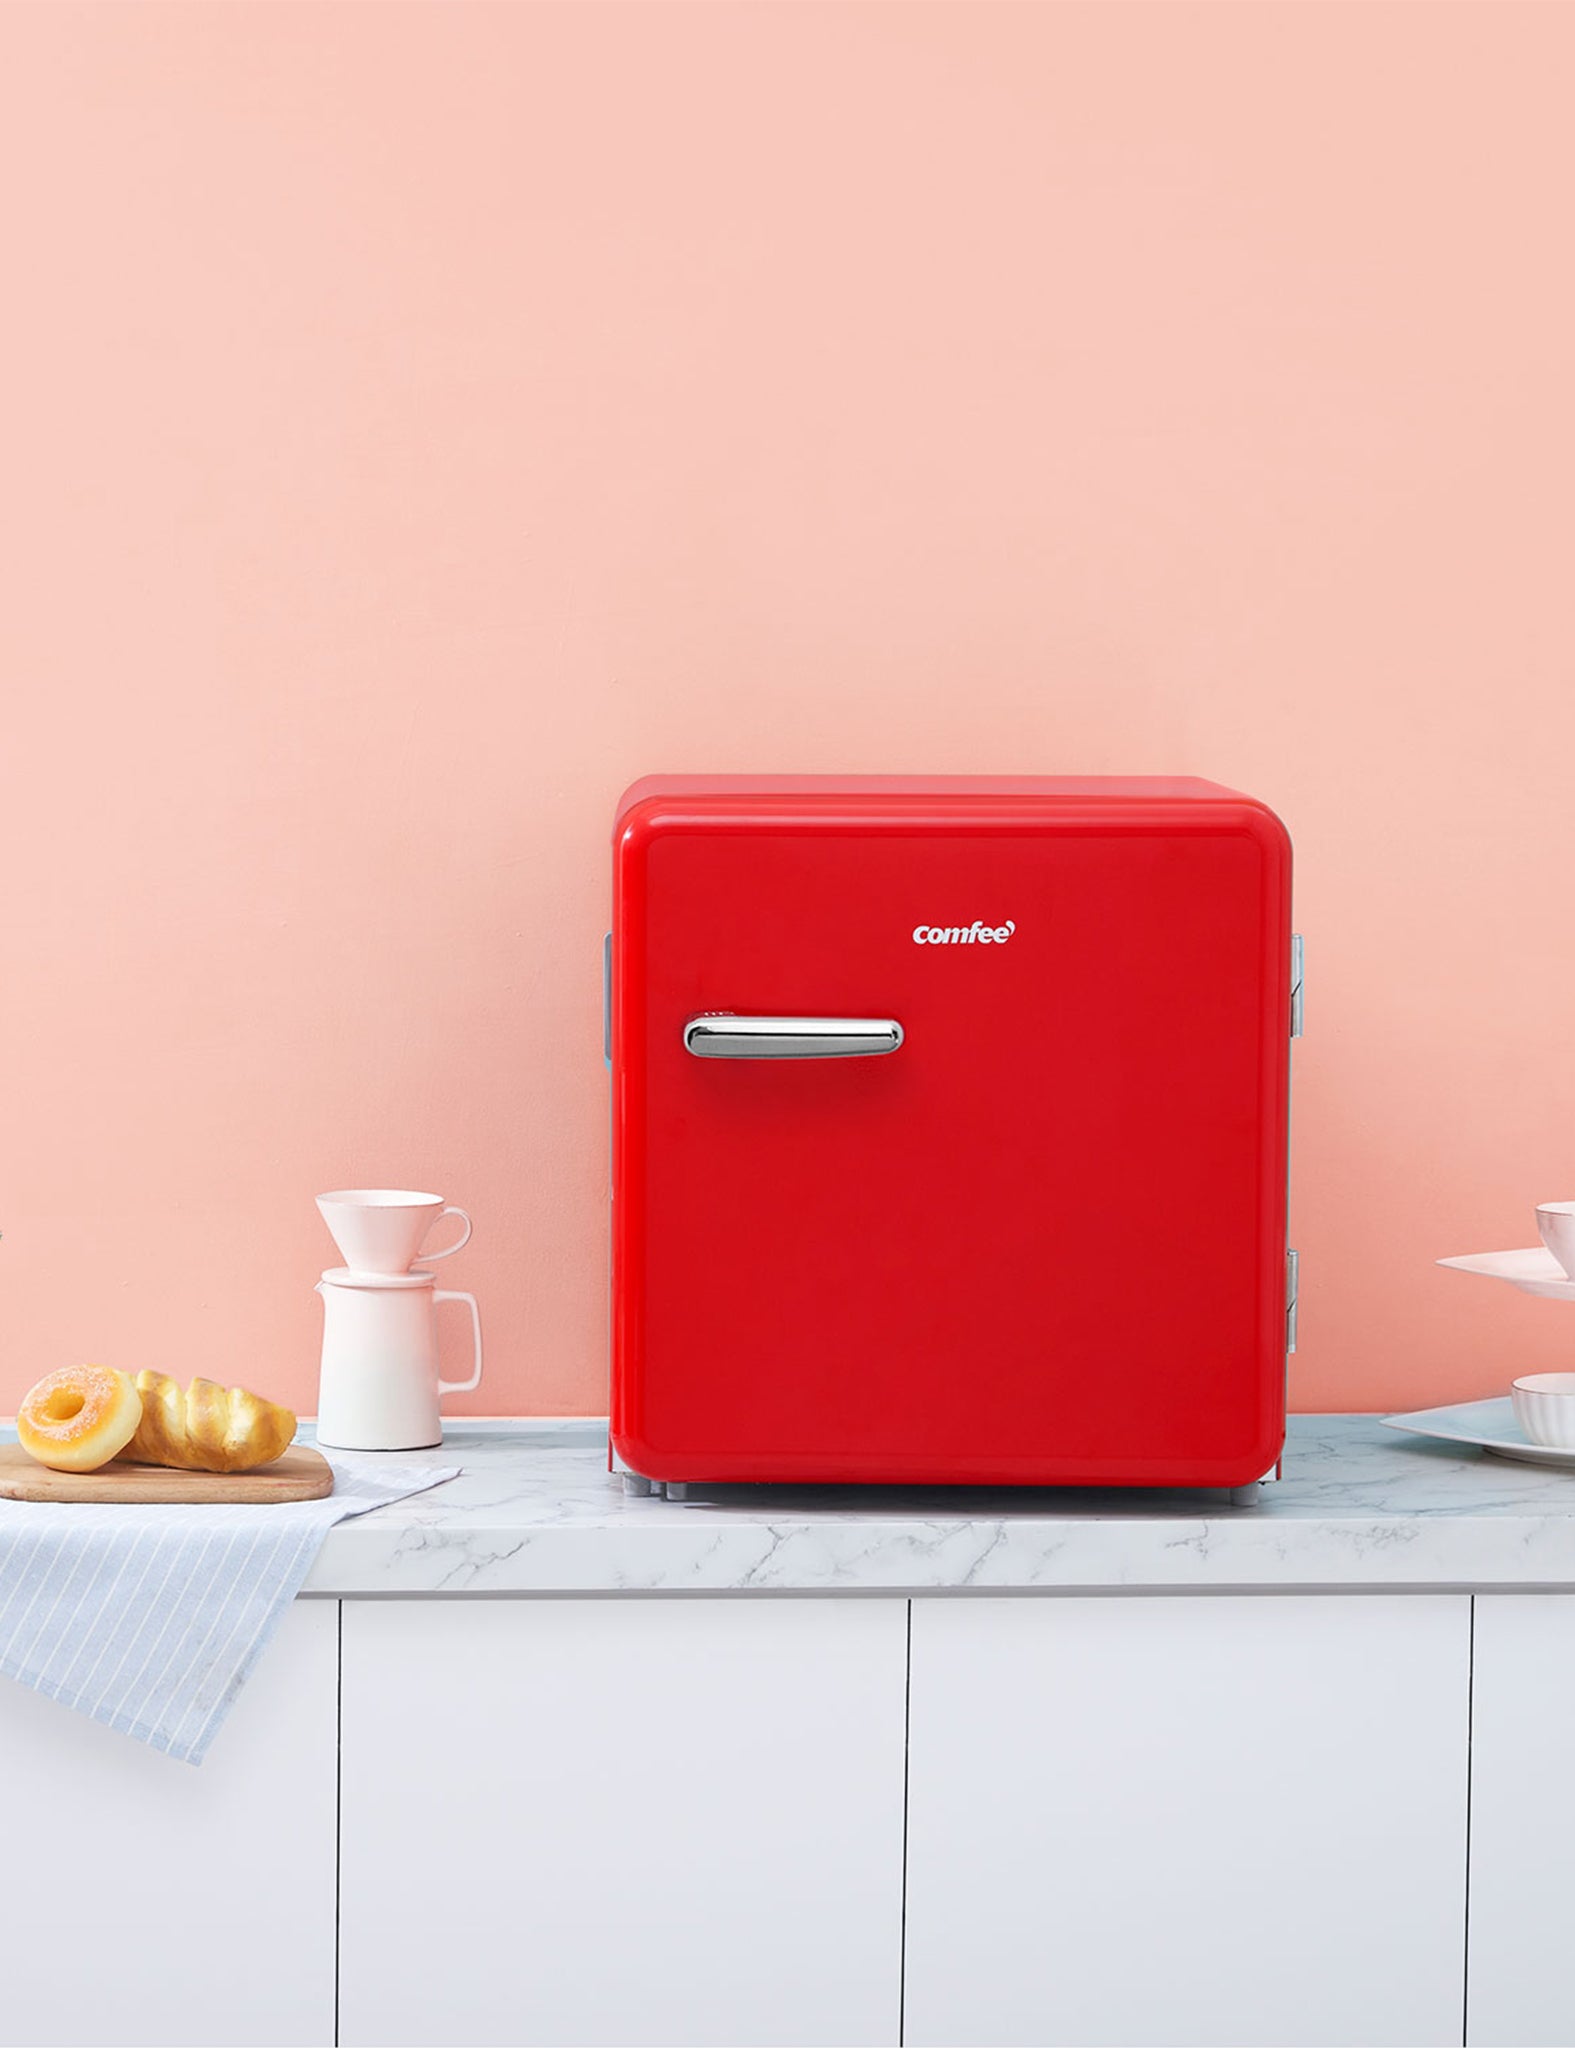 mini red retro style fridge sitting on a cabinet next to a plate of donuts